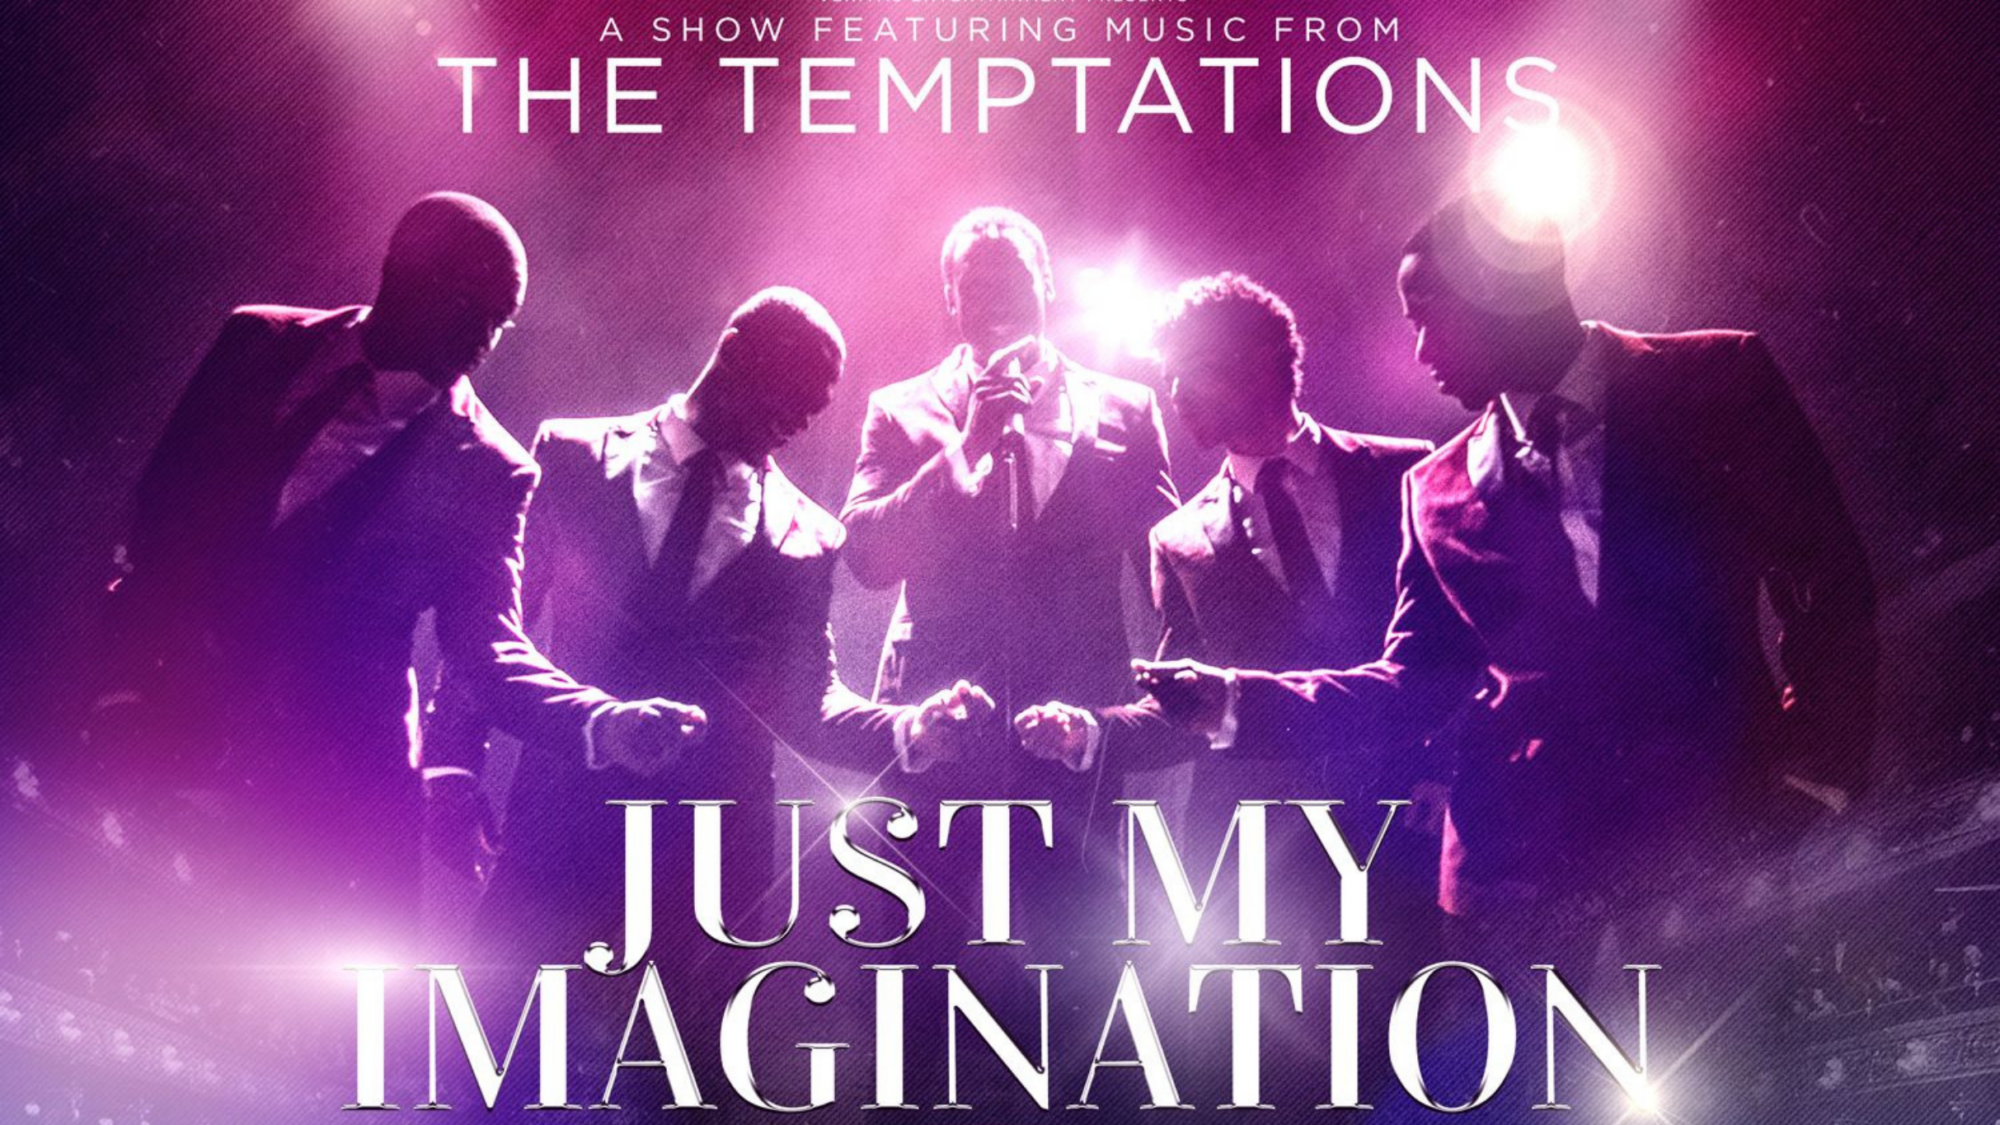 Image name Just My Imagination The Music of the Temptations at Sheffield City Hall Oval Hall Sheffield the 15 image from the post Just My Imagination - The Music of the Temptations at Sheffield City Hall Oval Hall, Sheffield in Yorkshire.com.